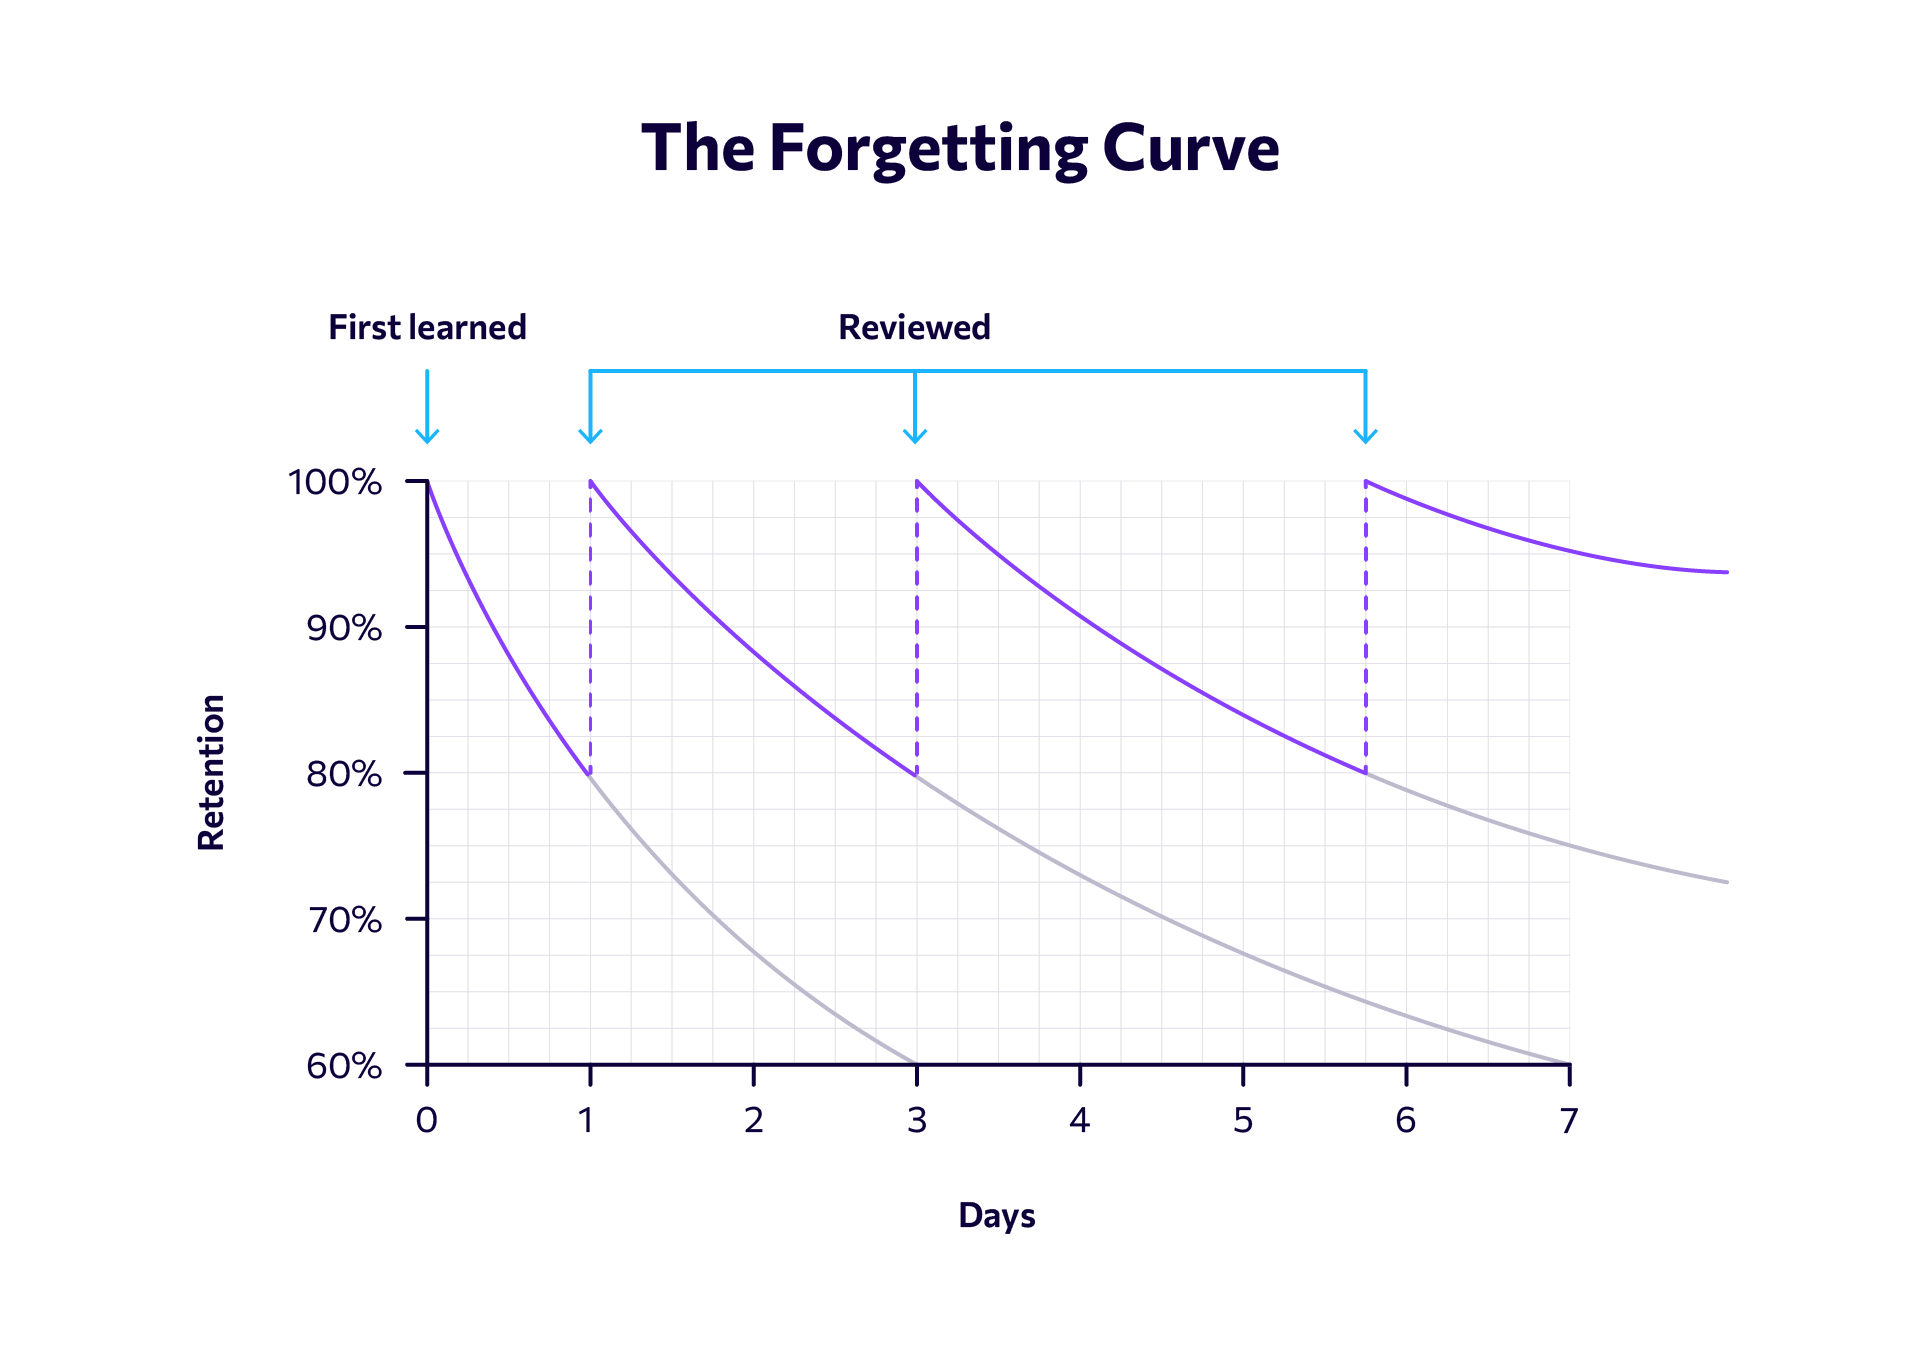 Hermann Ebbinghaus' Forgetting Curve, a principle of microlearning